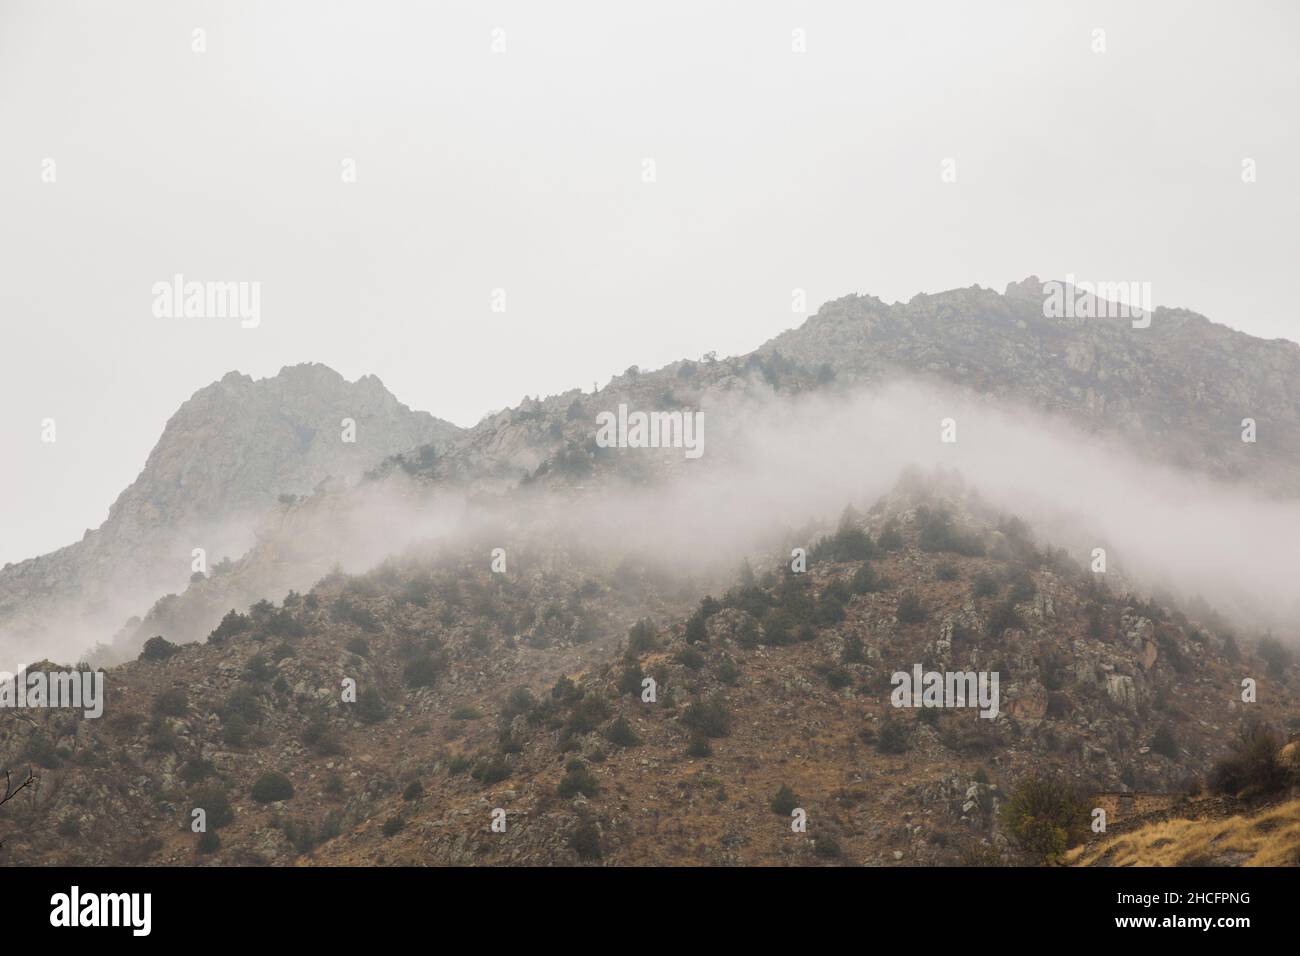 Mountain View has a beautiful morning mist. Stock Photo